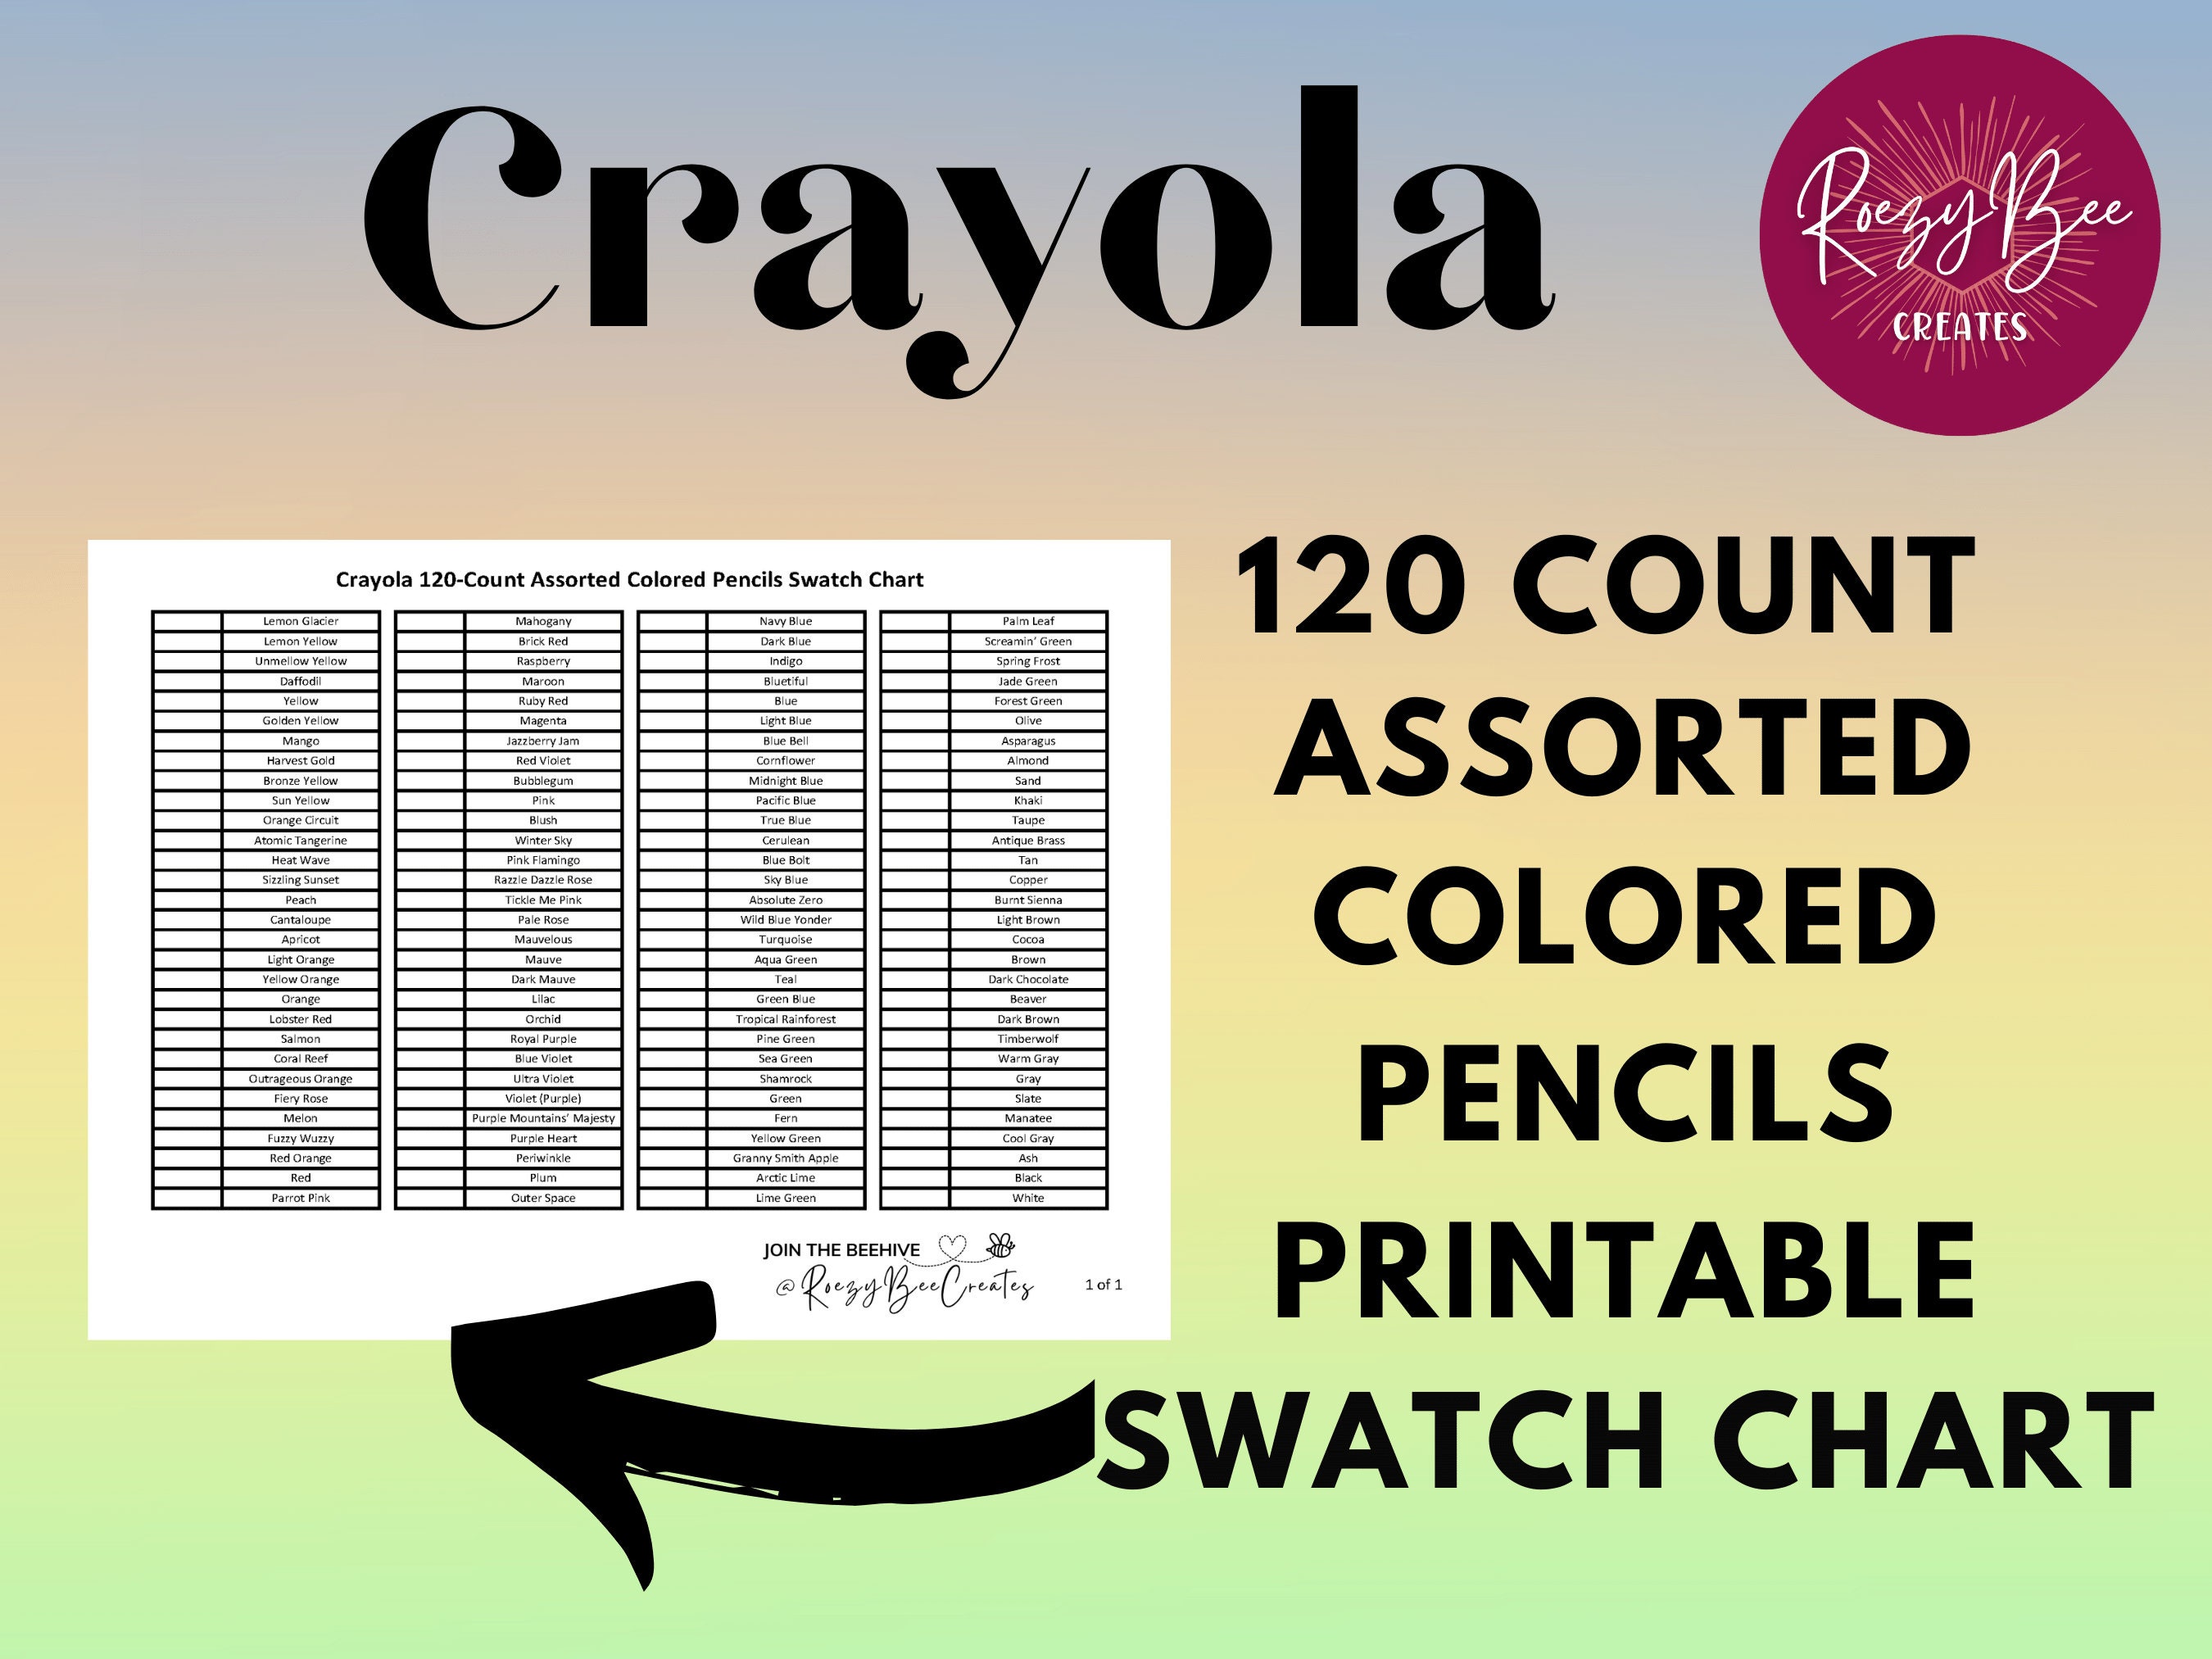 Swatch Form: Crayola Colors of the World Colored Pencils 24pc. 